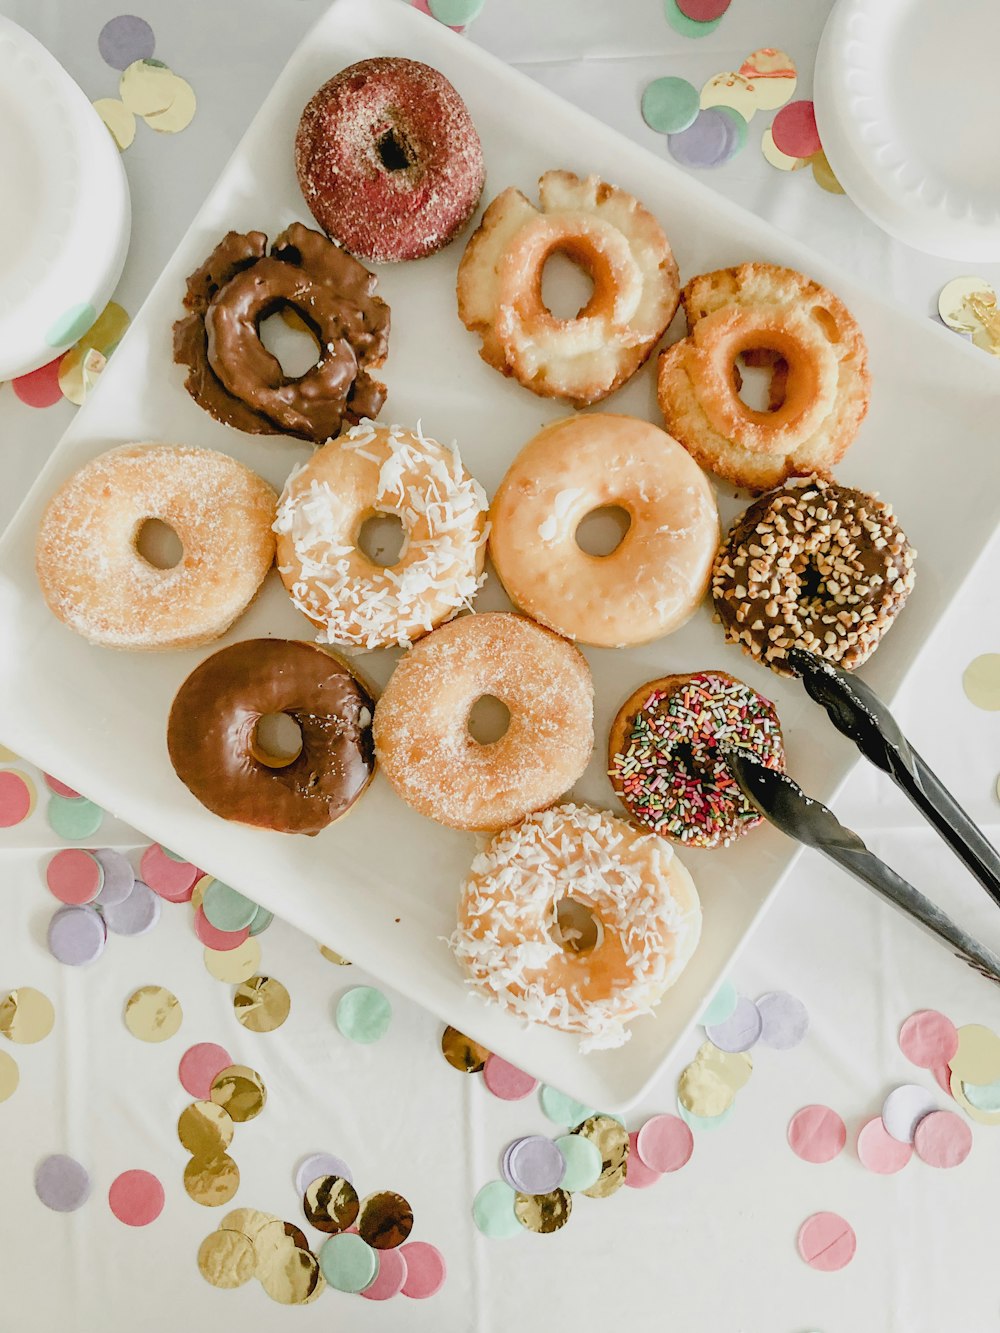 assorted doughnuts on white ceramic tray